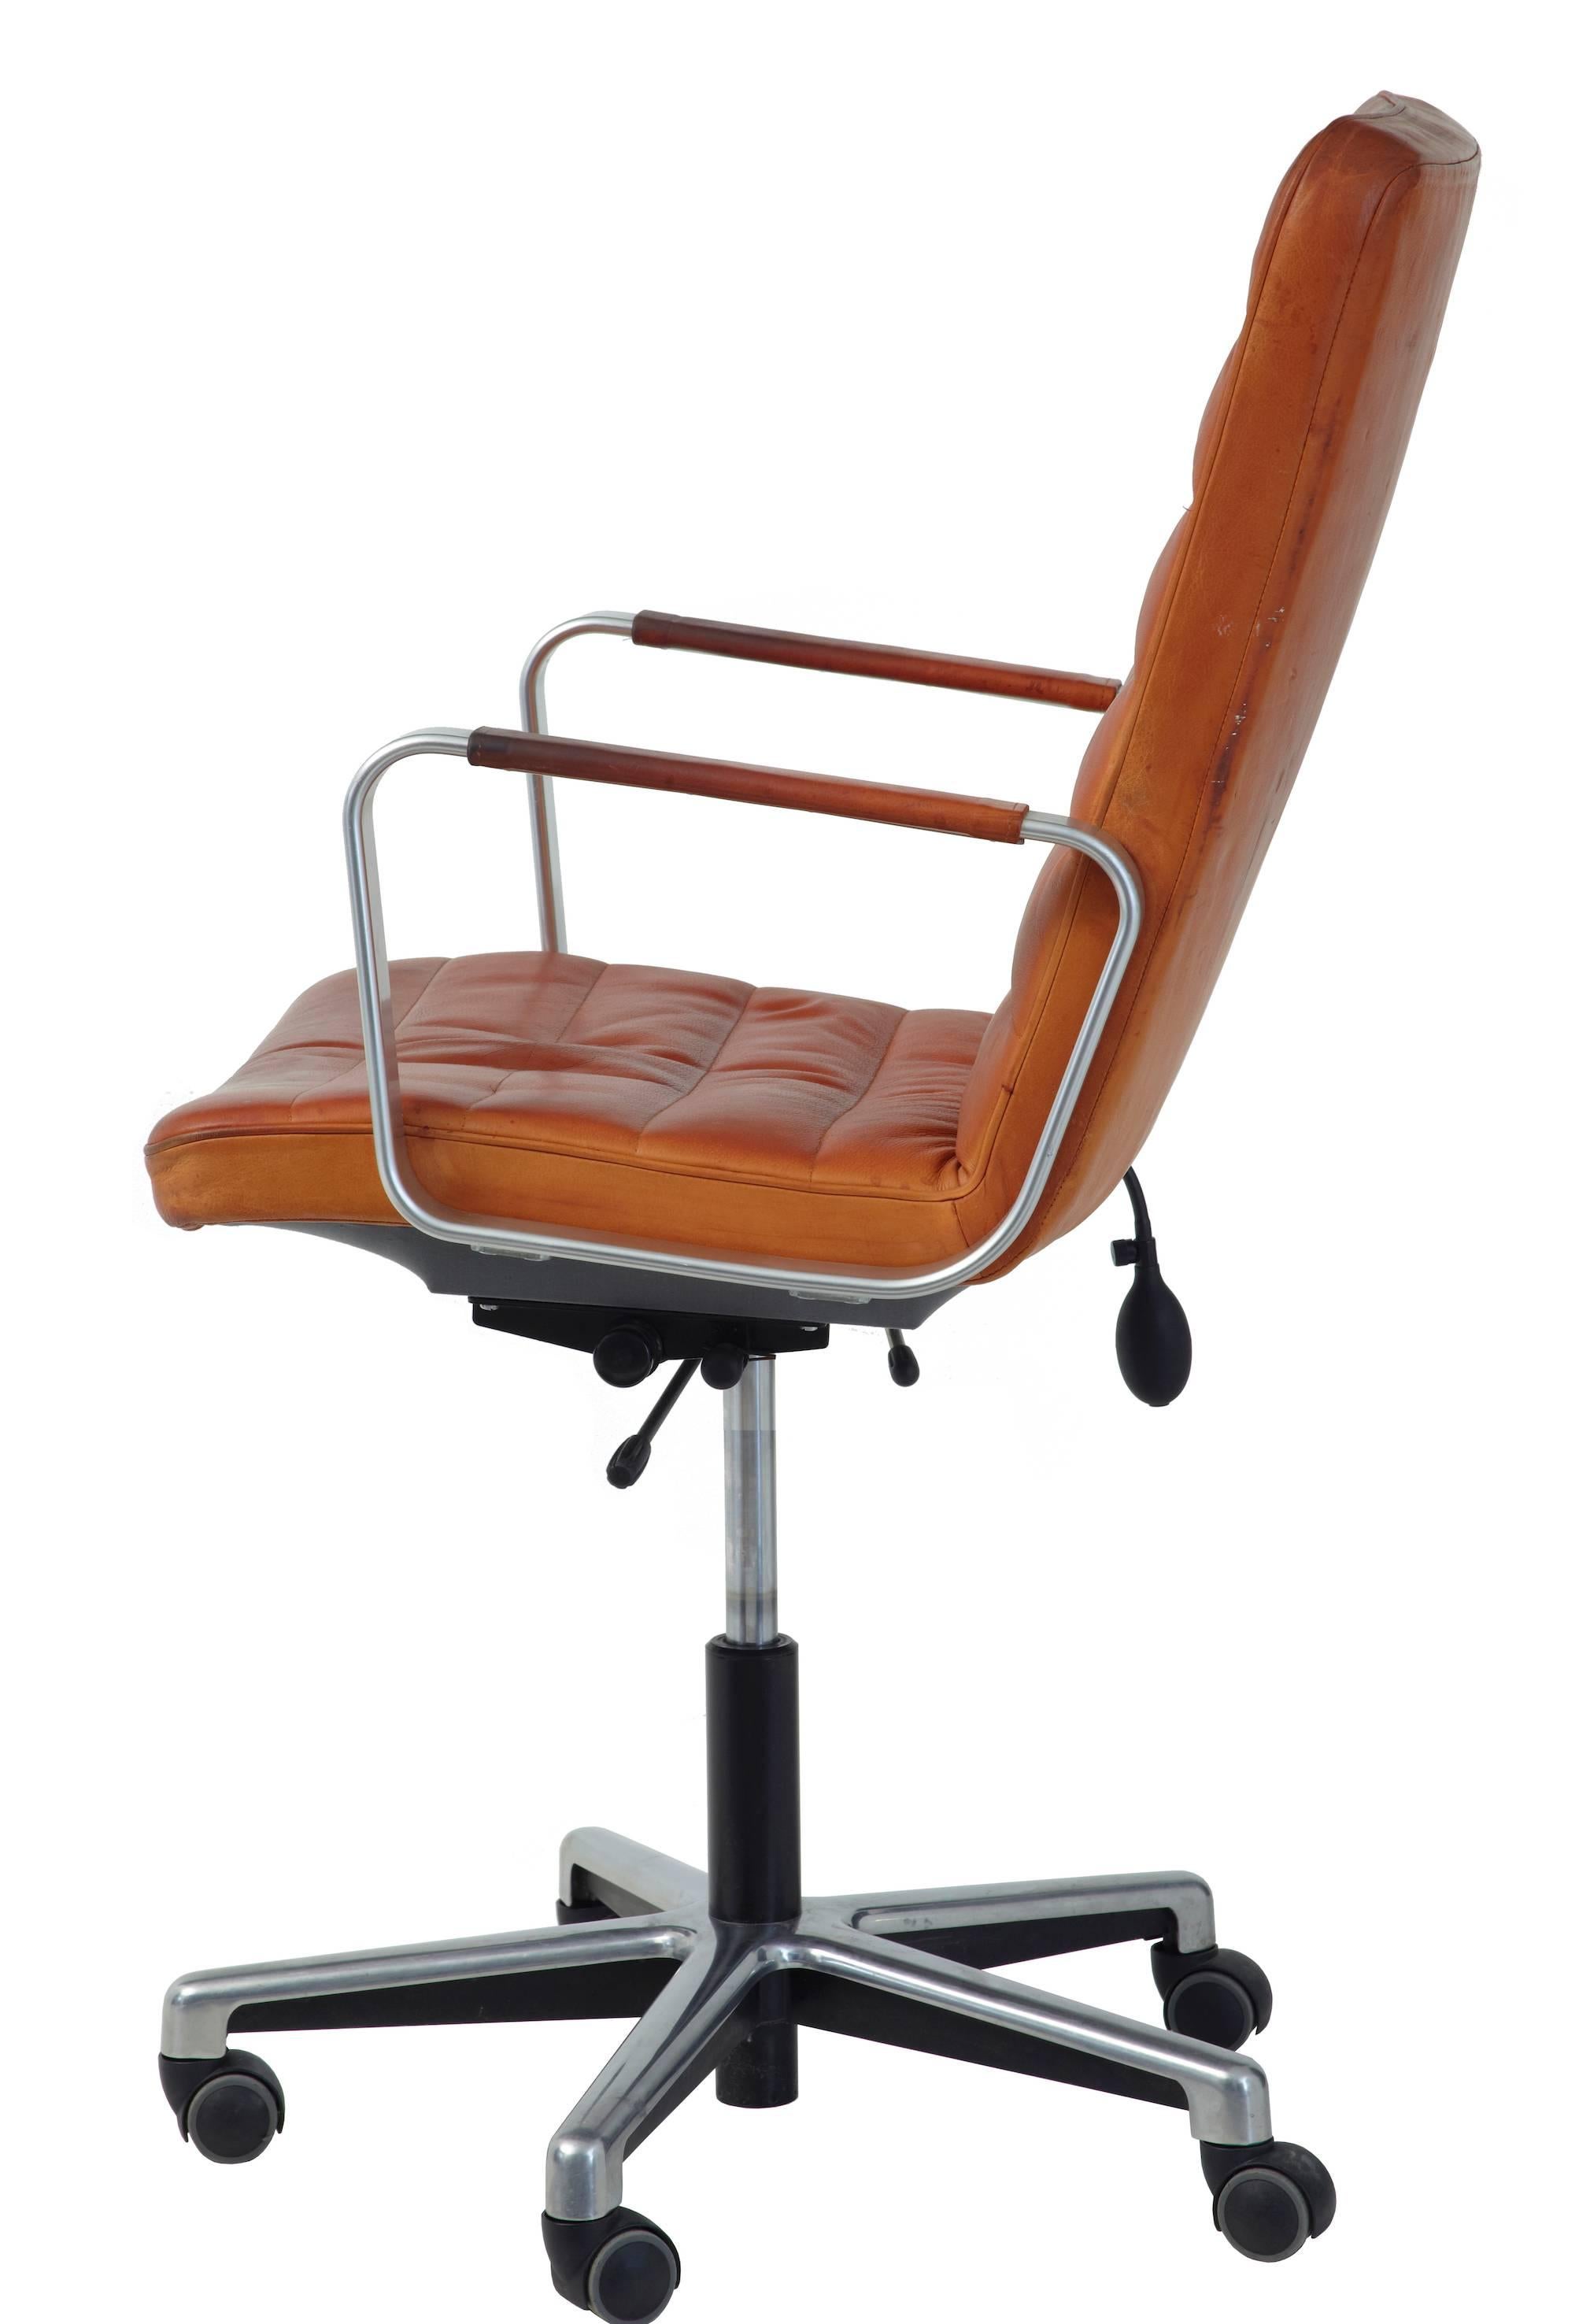 Superb stylish Swedish office chair by Joc, circa 1980
Leather arms and upholstery. Good quality leather with some staining.
Lumber support adaptor

Measure: Height 41